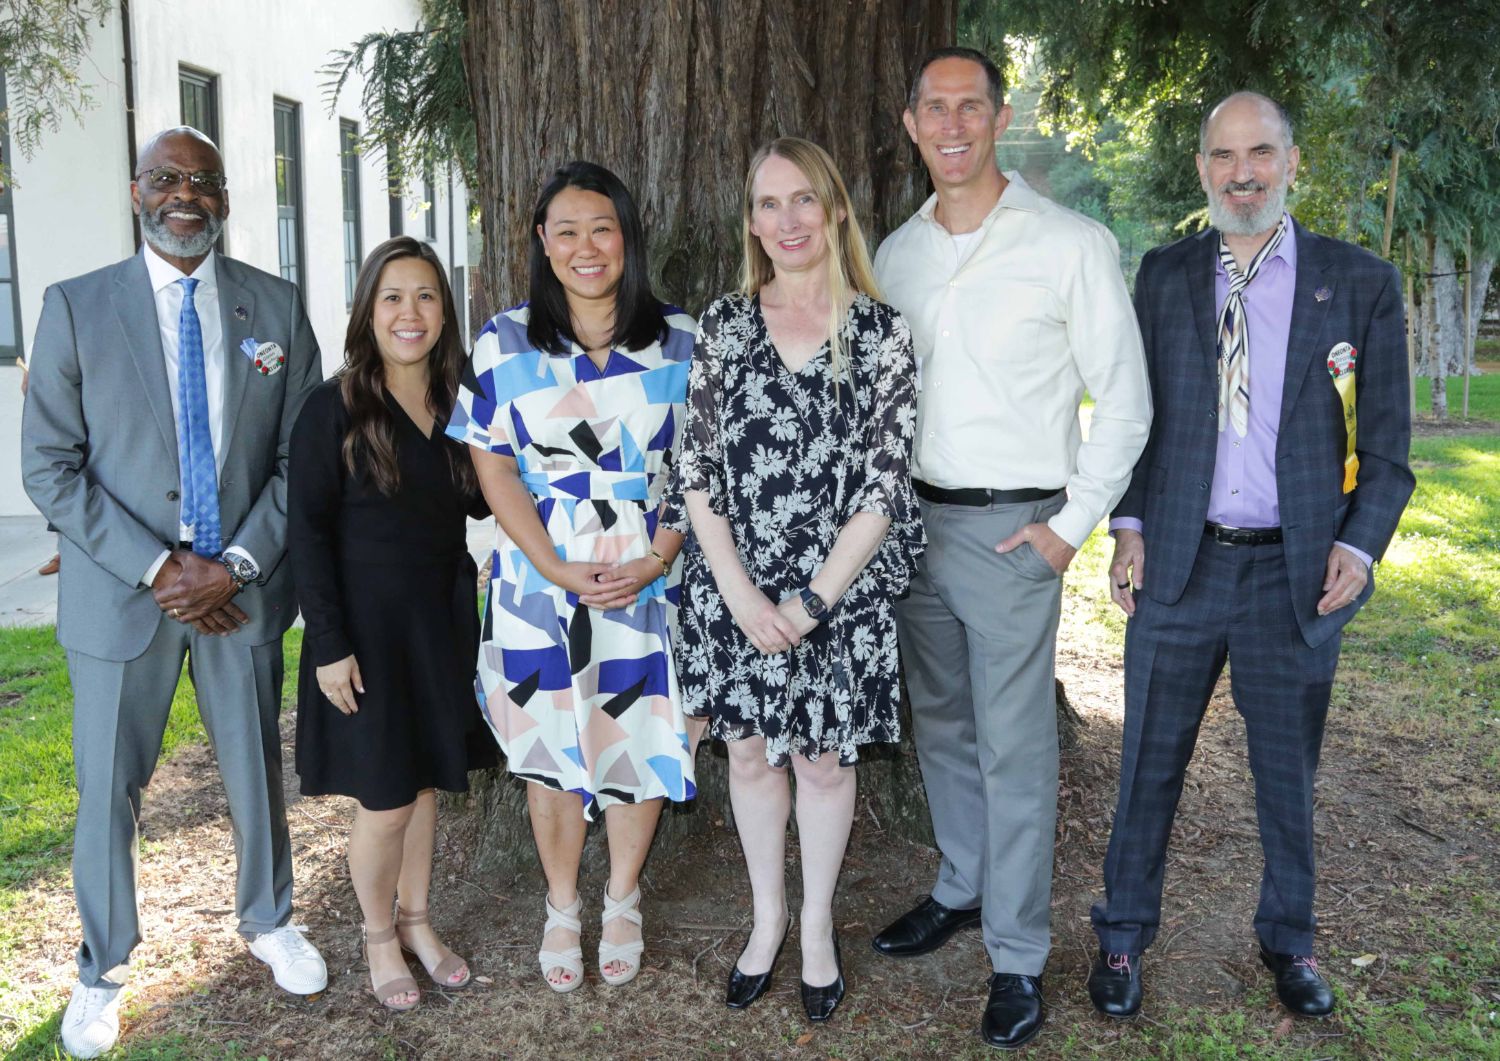 PHOTO: provided by The Oneonta Club | The South Pasadenan | Oneonta Club President Glenn Crawford with Marengo Elementary Principal, Noelle Fong, Teacher of the Year recipient, Judy Ho, Teacher of the Year recipient Aimee Levie-Hultman, SPHS Principal John Eldred, and Oneonta Foundation President, Dean Serwin. 